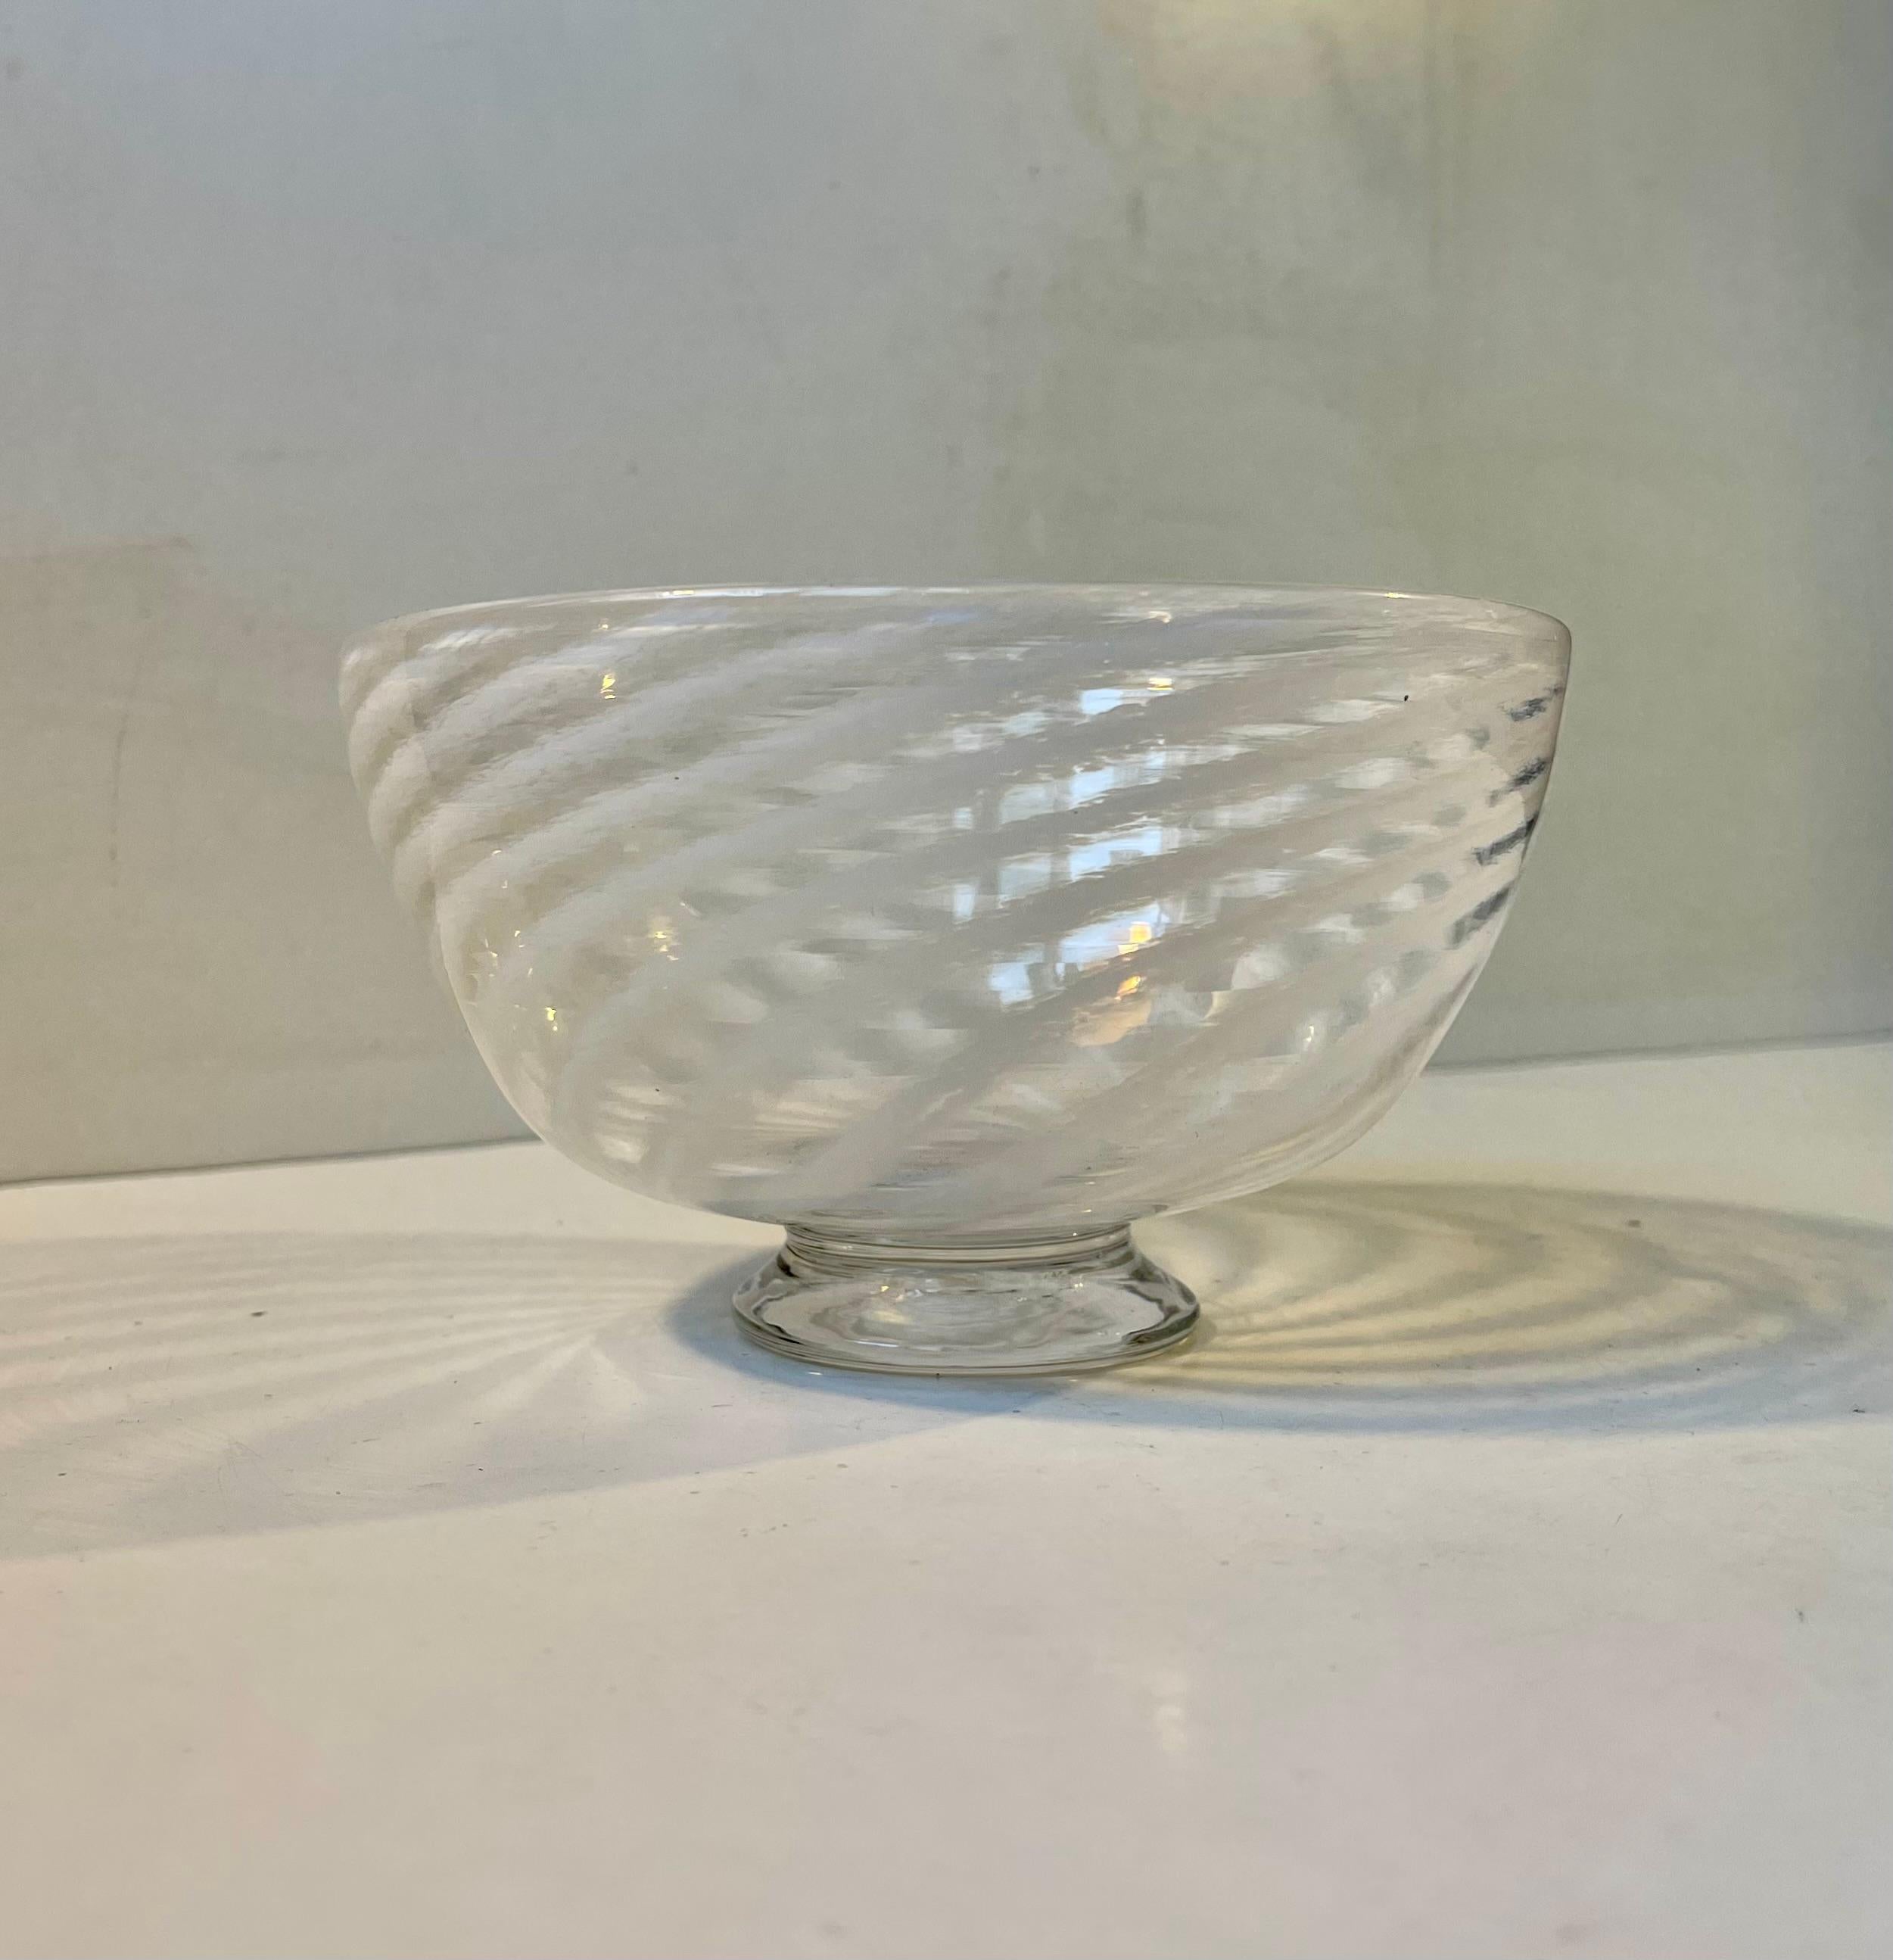 Footed circular glass bowl decorated with white swirls. It was made by Venini in Murano Italy during the 1960s and was probably designed by Fulvio Bianconi. Measurements: D: 16, H: 9 cm.